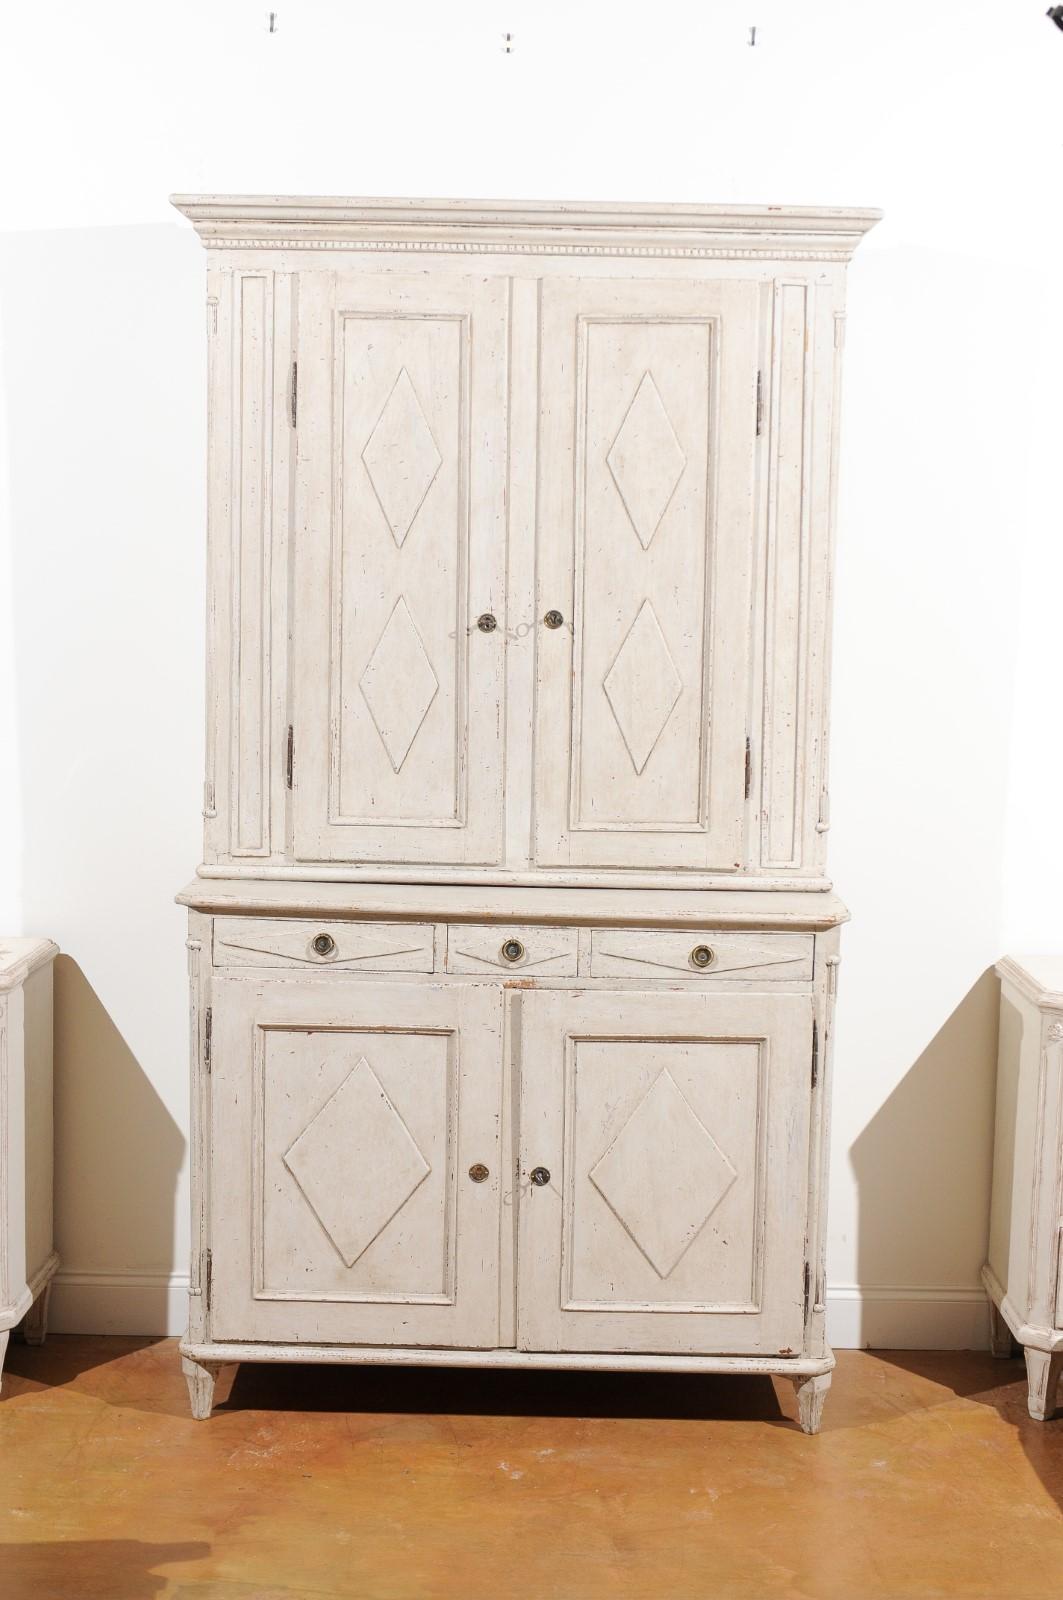 A Swedish Gustavian period two-part tall painted wood cabinet from the late 18th century, with doors, drawers and diamond motifs. Born in Sweden at the end of the 18th century, this elegant cabinet features a molded cornice with reeded accents,